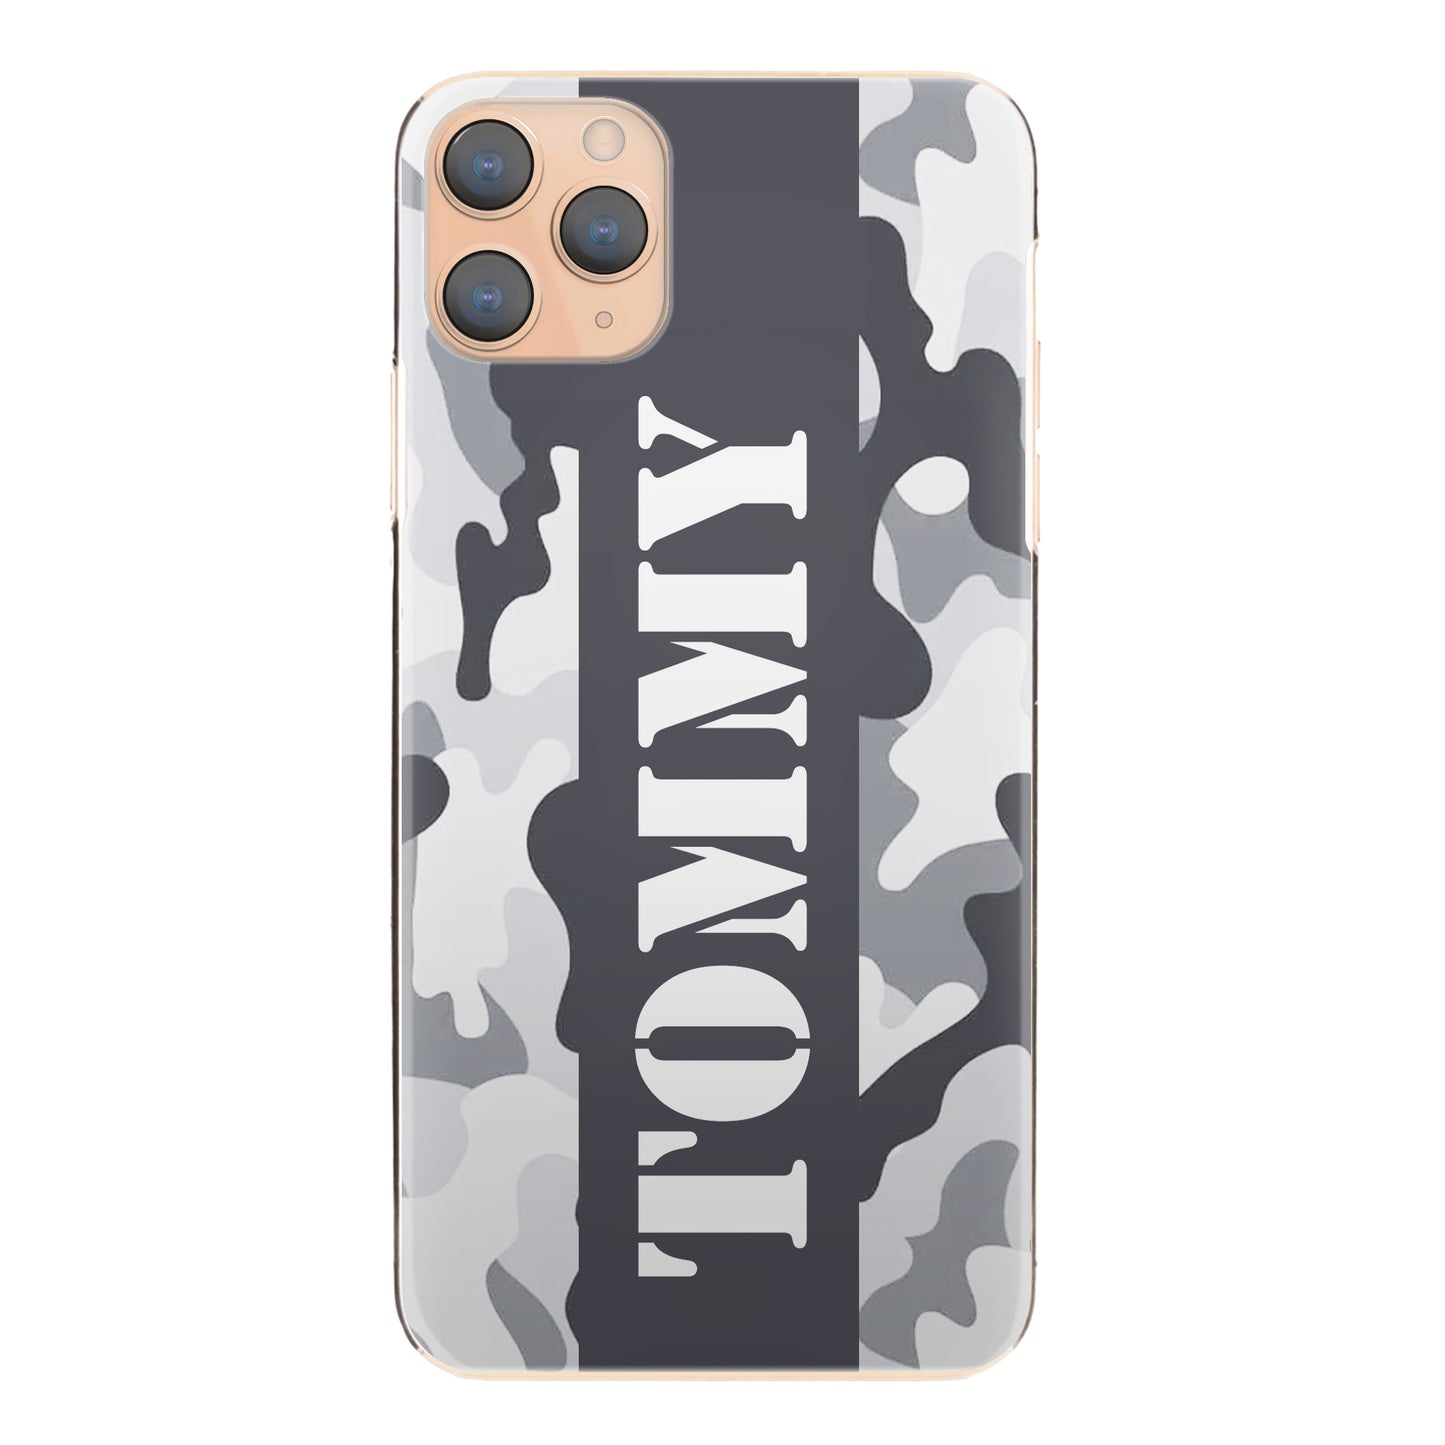 Personalised One Phone Hard Case with Military Text on Artic Camo